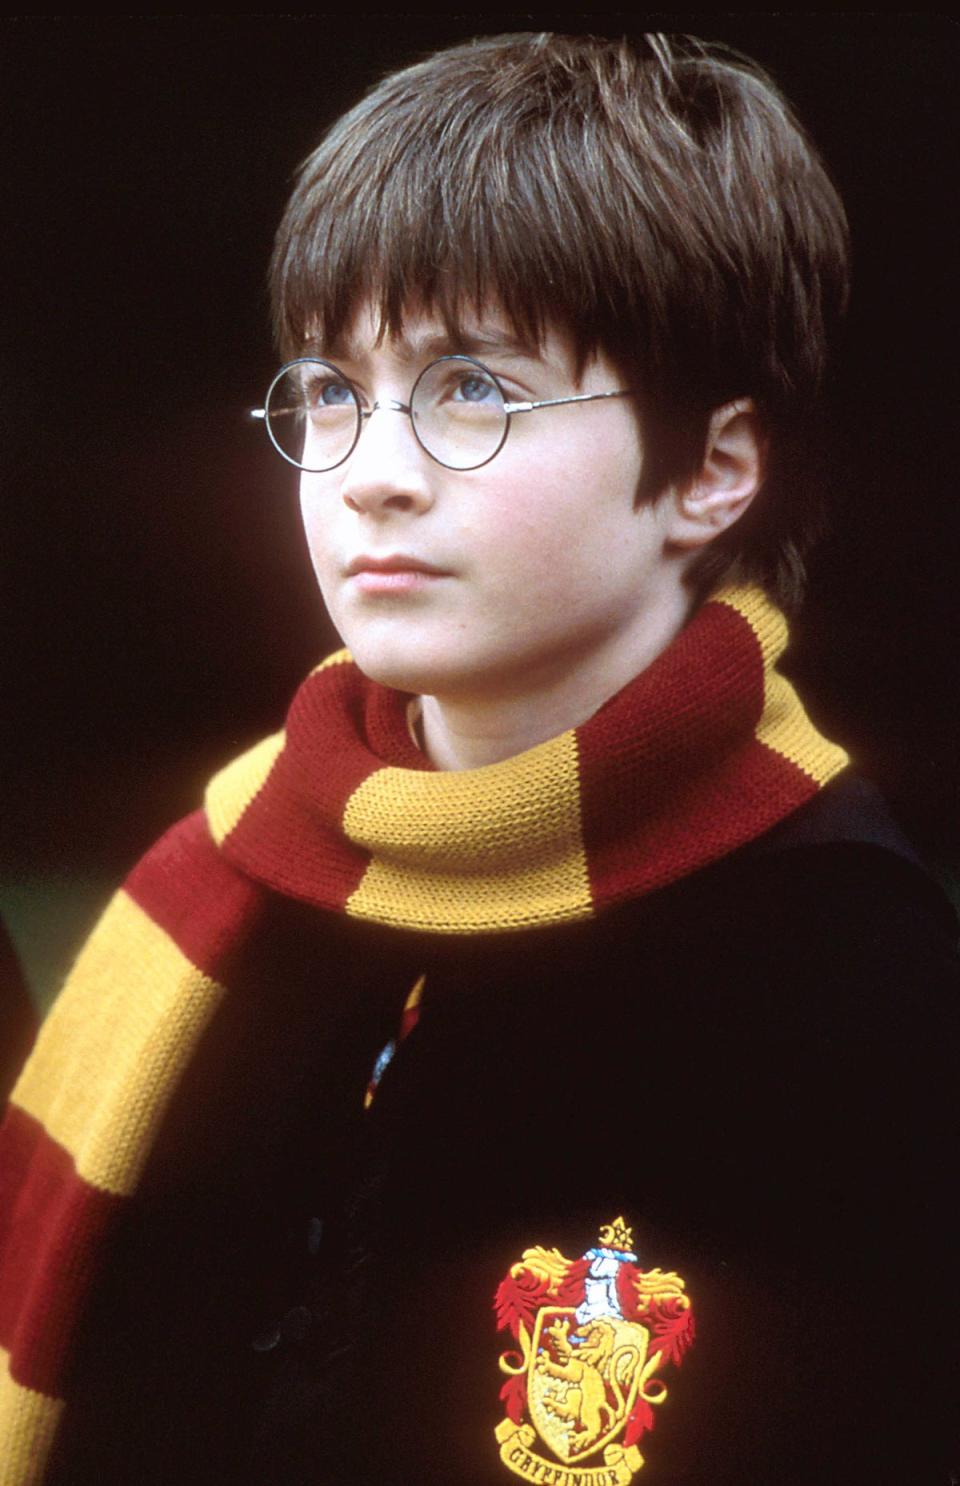 Radcliffe in ‘Harry Potter and the Philosopher’s Stone’, where Holmes was his stunt double (Warner Bros)